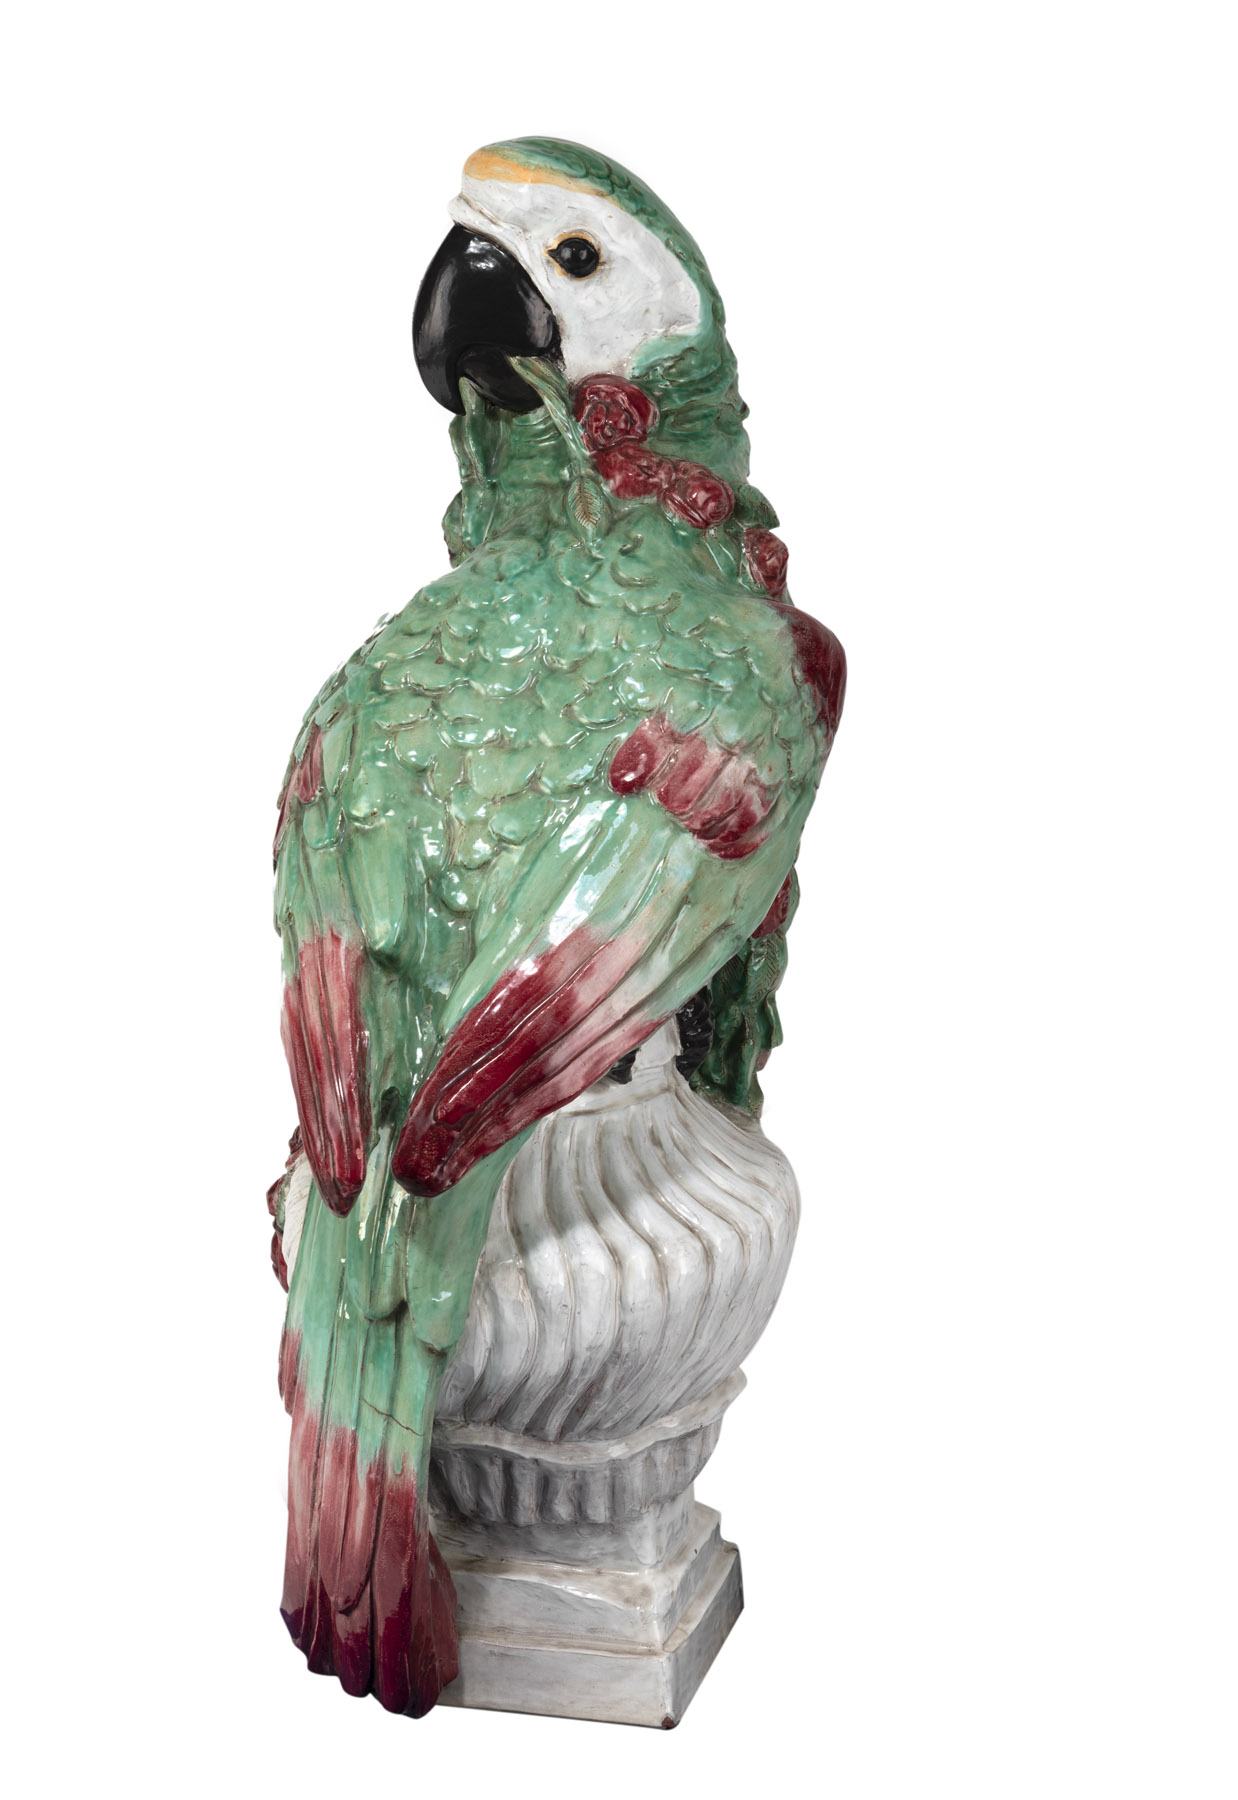 A LARGE NYMPHENBURG MAIOLICA FIGURE OF A MACAW WITH GARLAND - Image 5 of 5